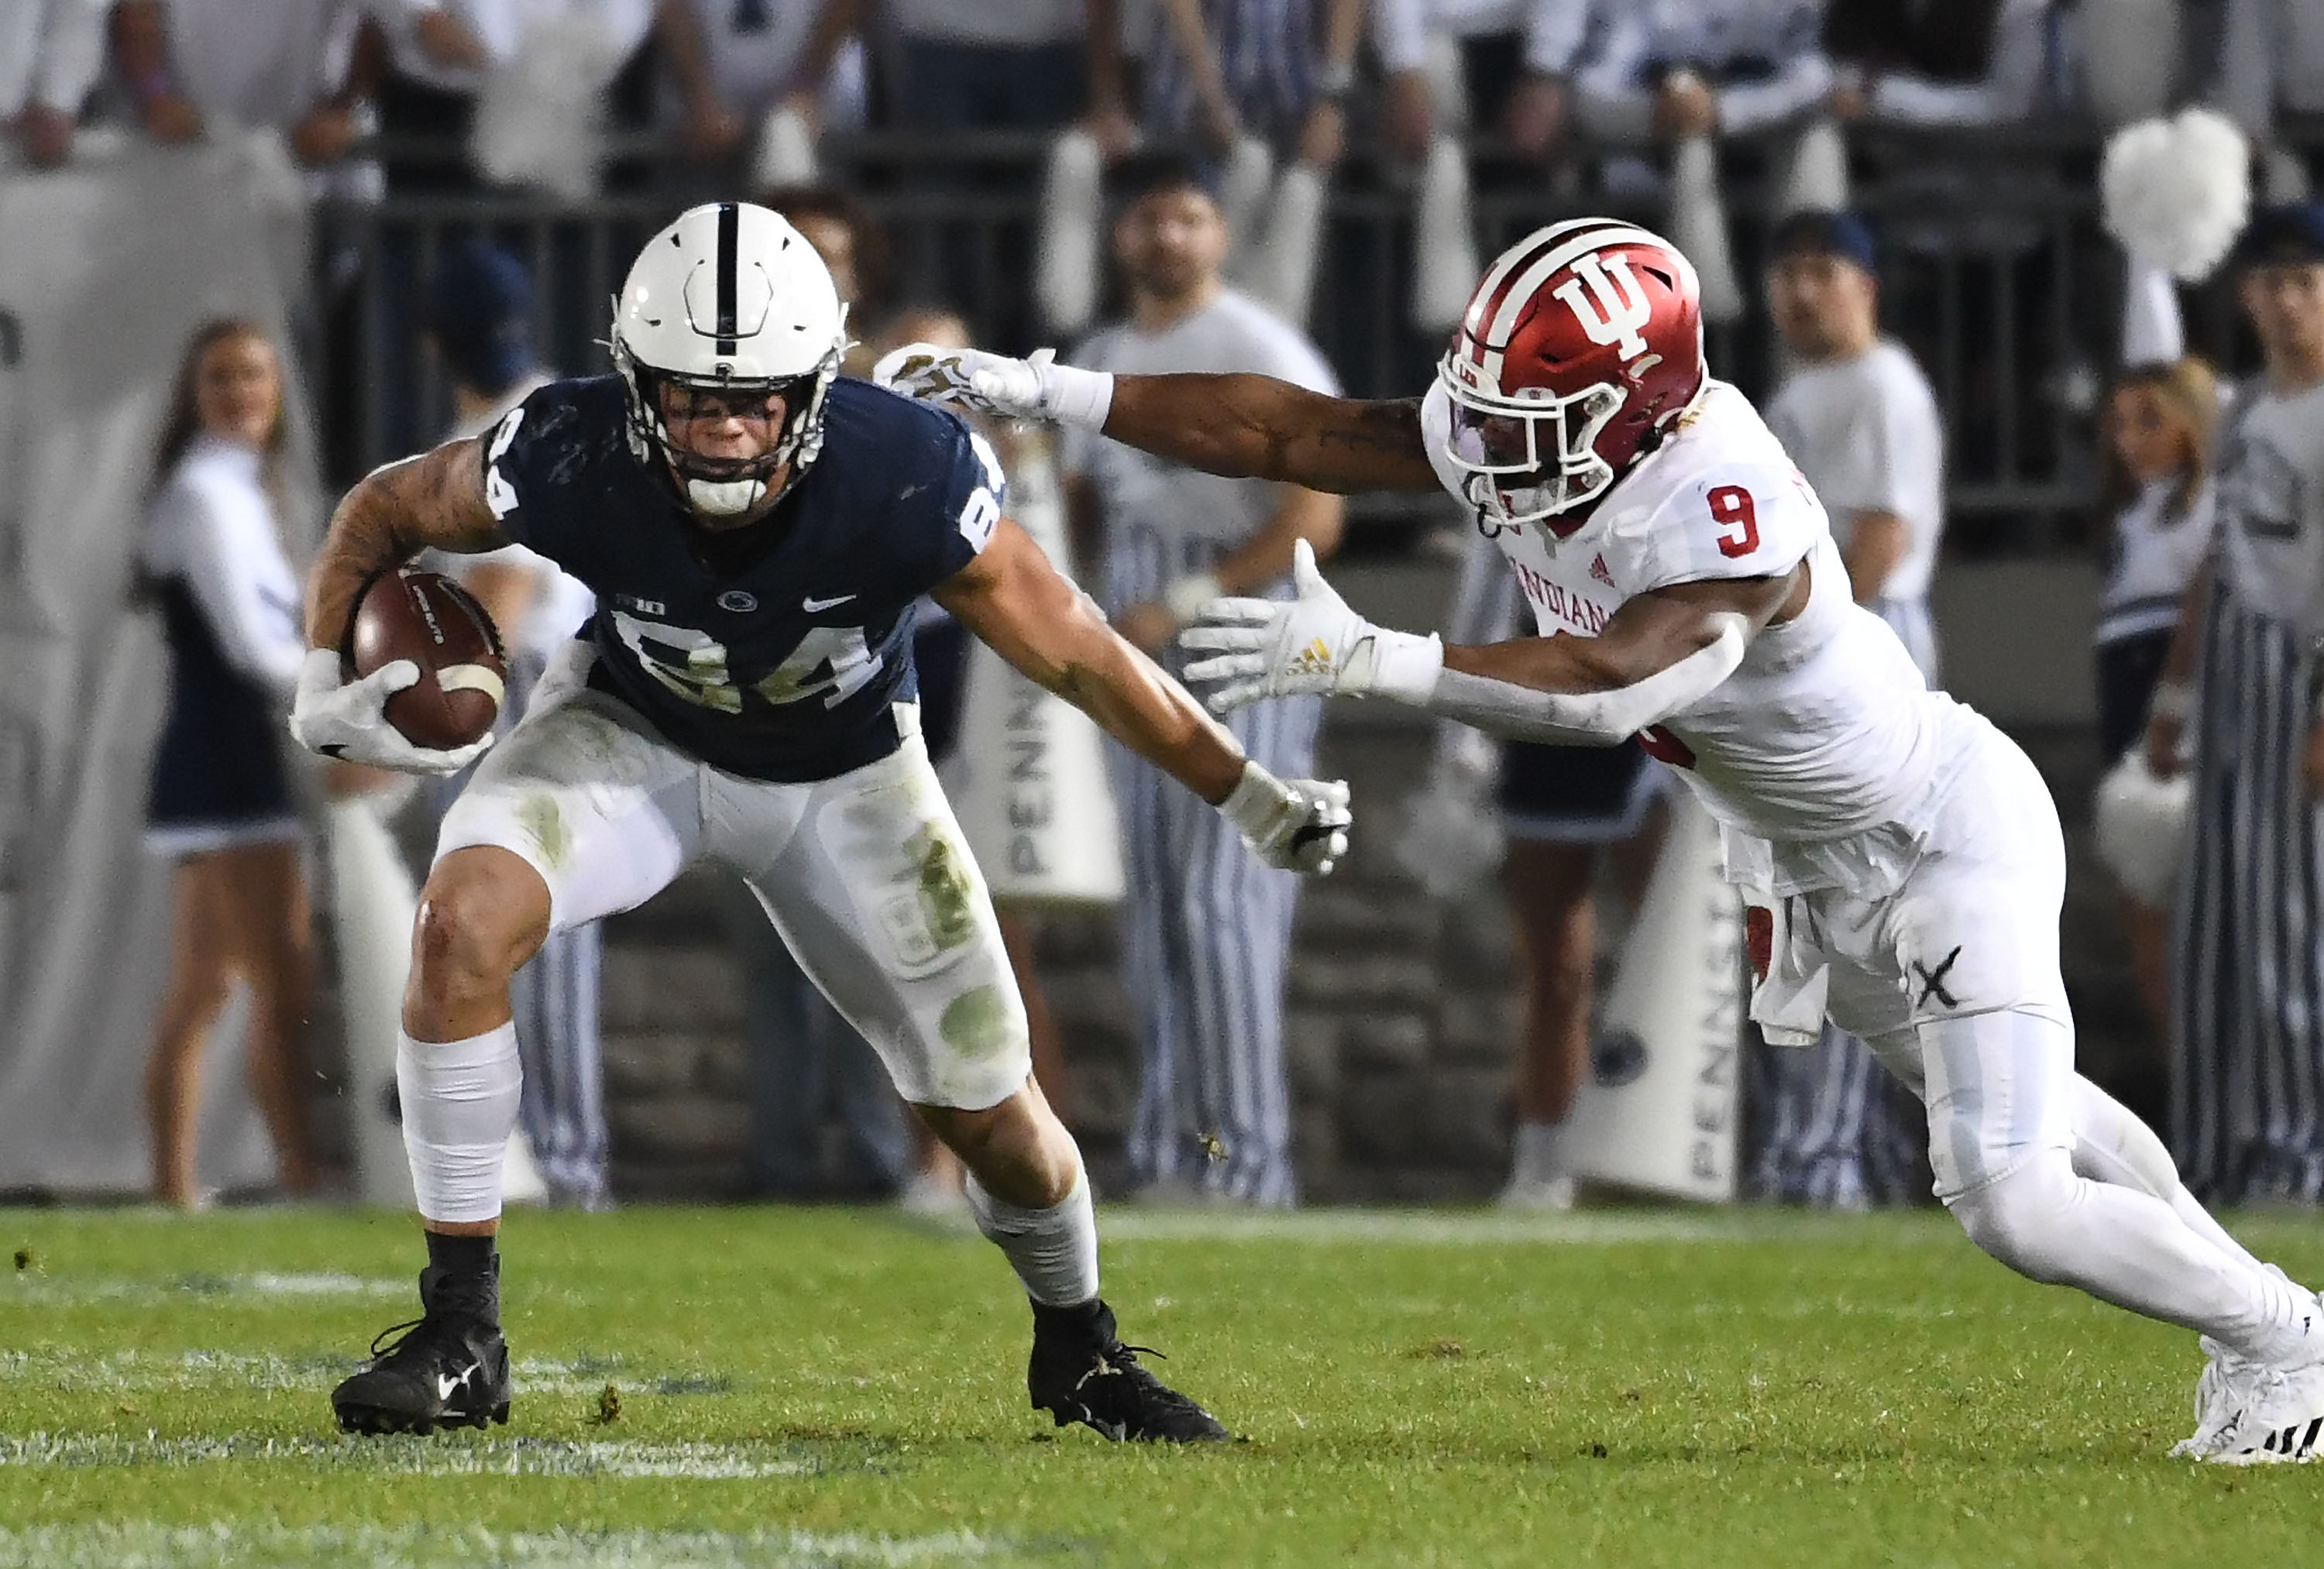 PENN STATE PREVIEW: INDIANA